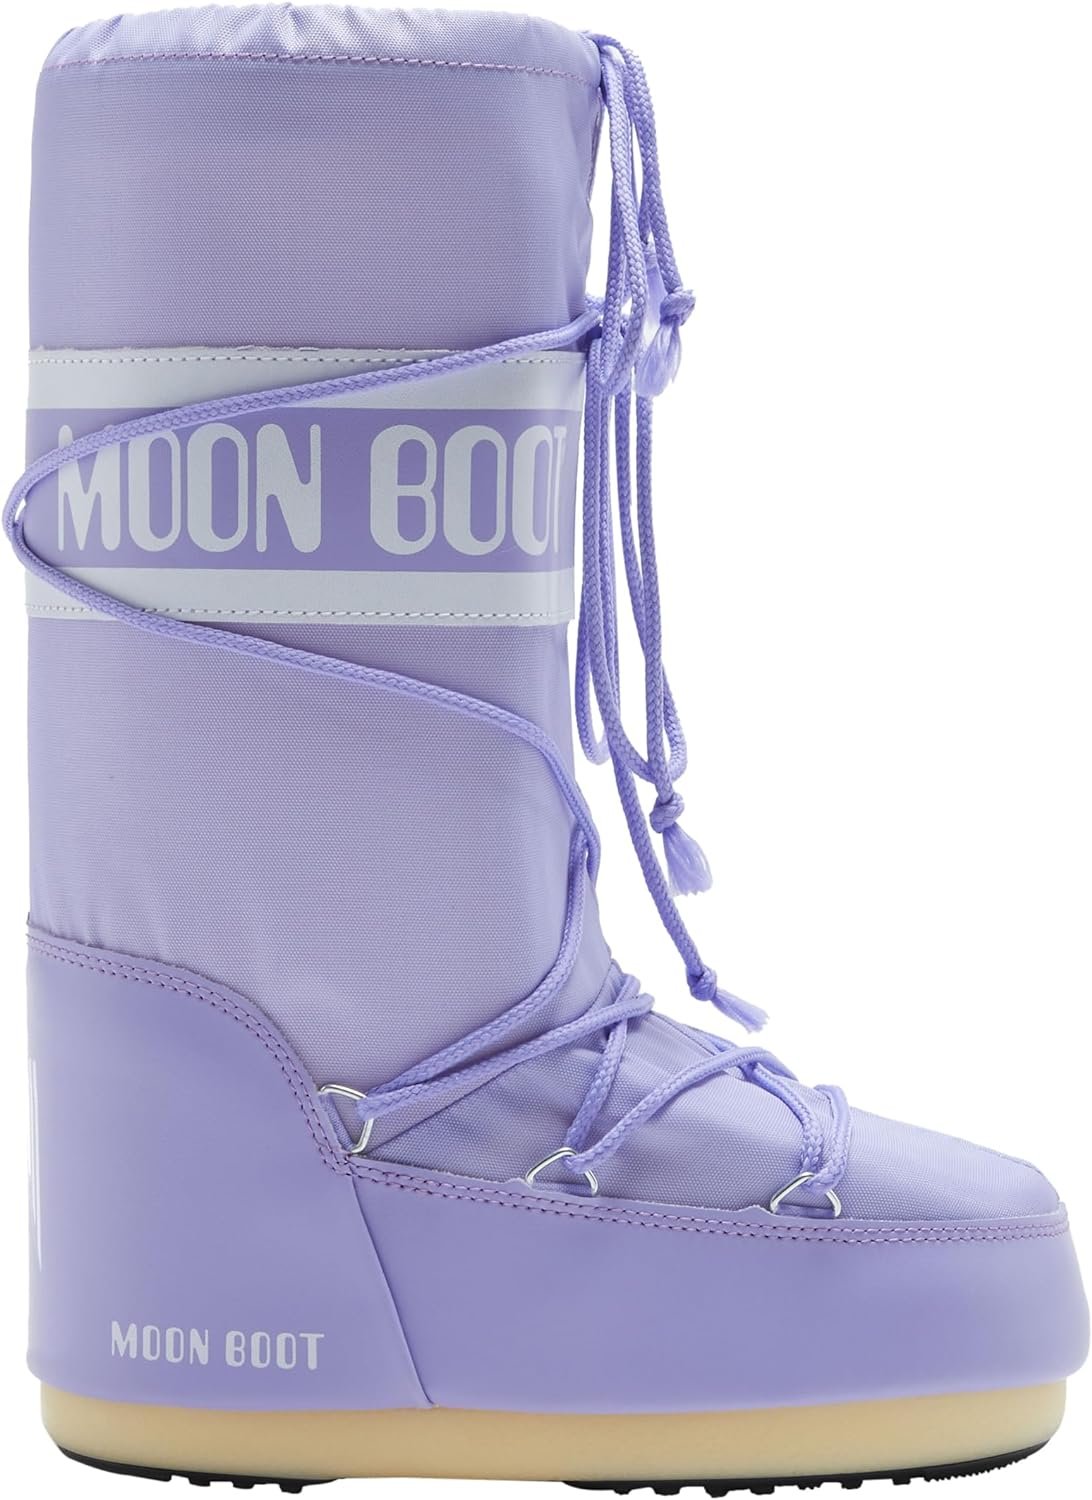 LILAC UNISEX MOON BOOT